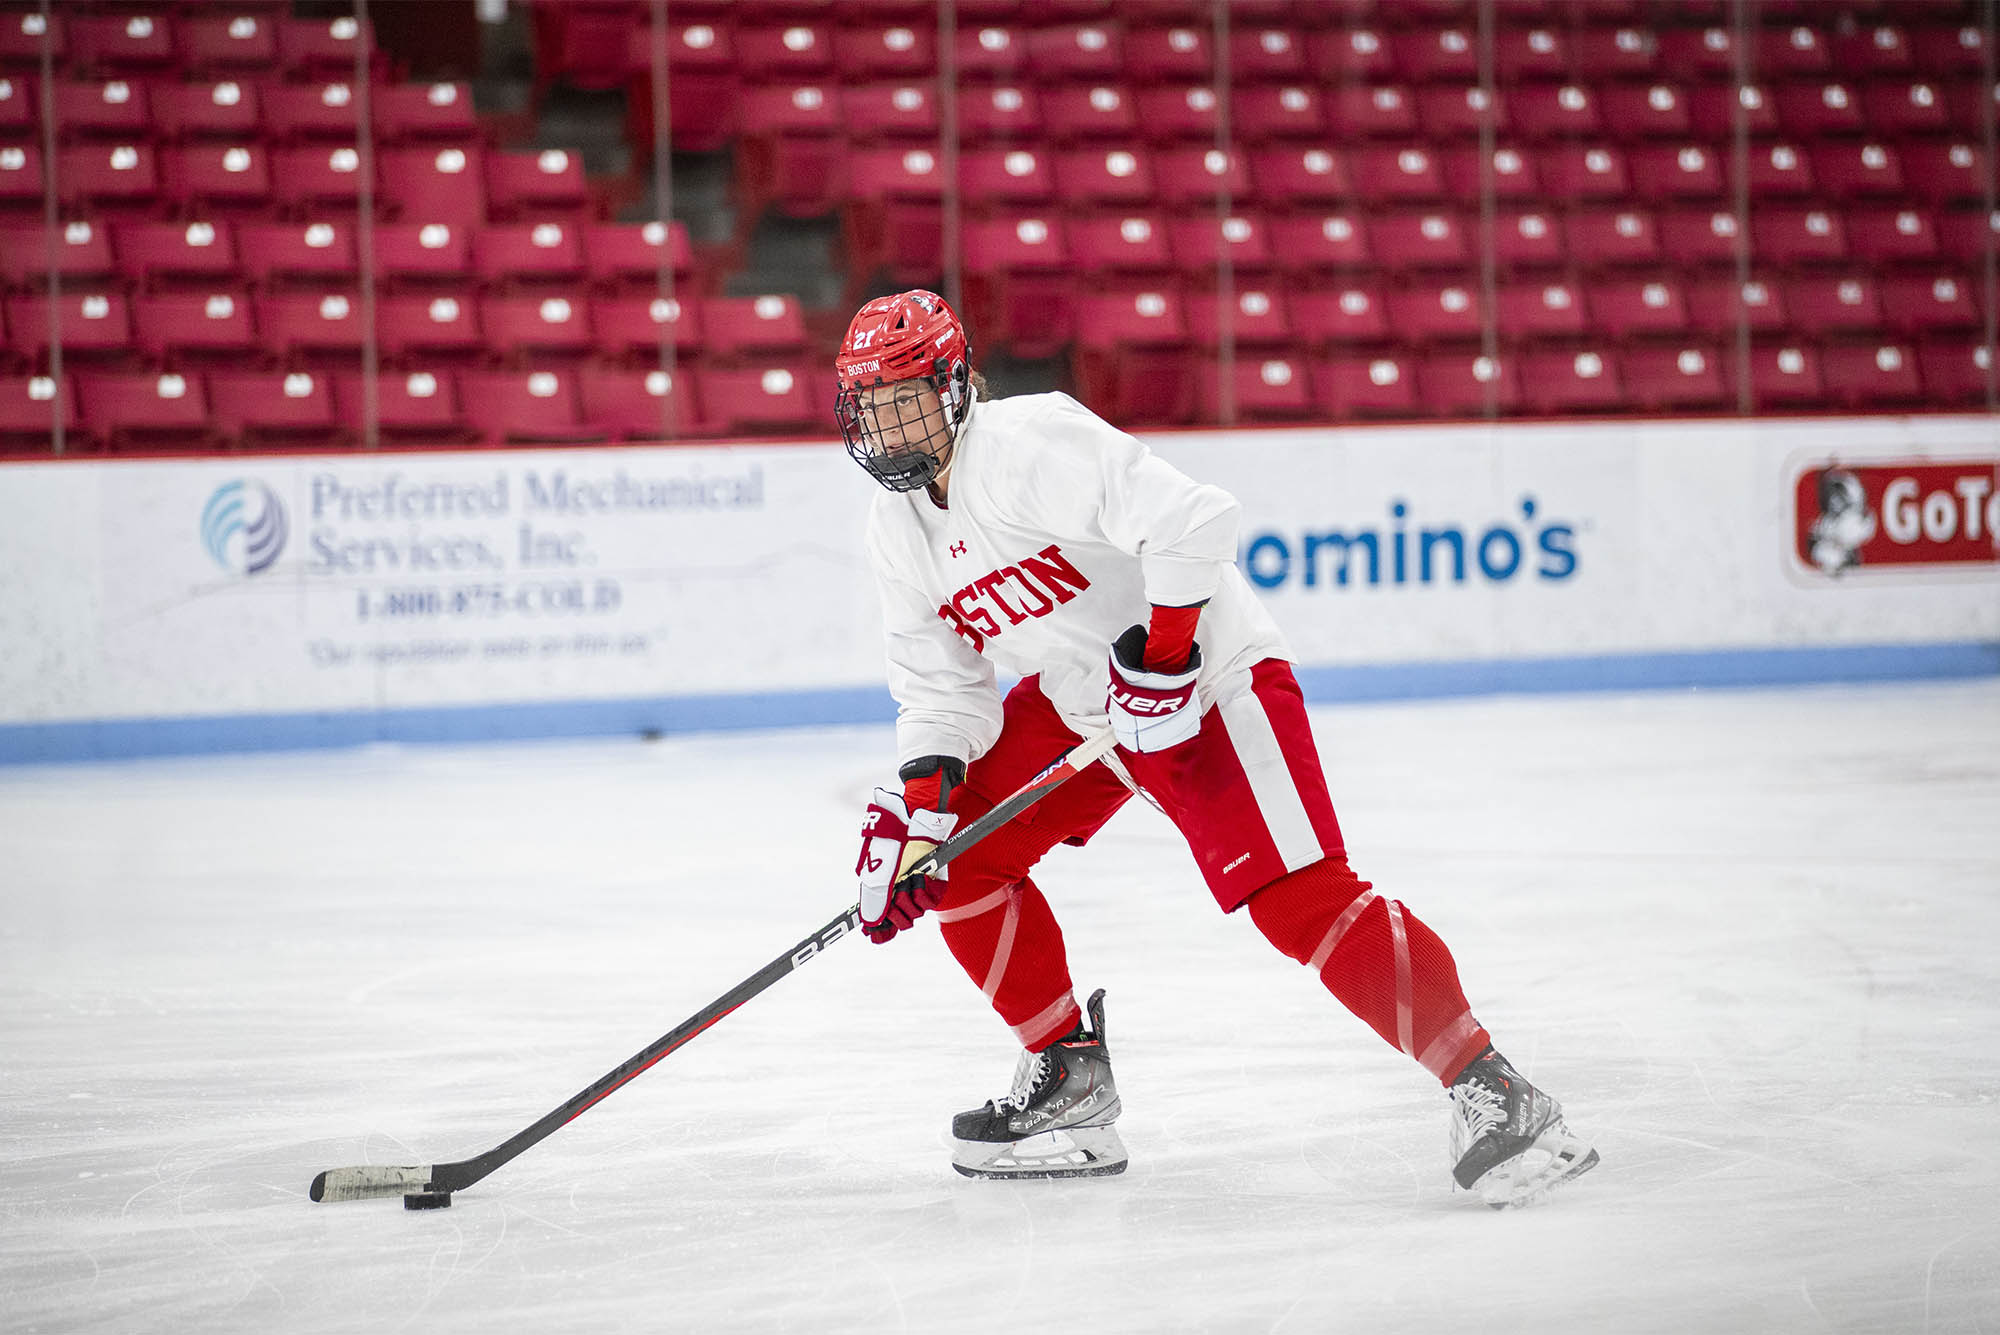 Photo: A hockey player in Boston University red and white uniform skating down ice with the puck